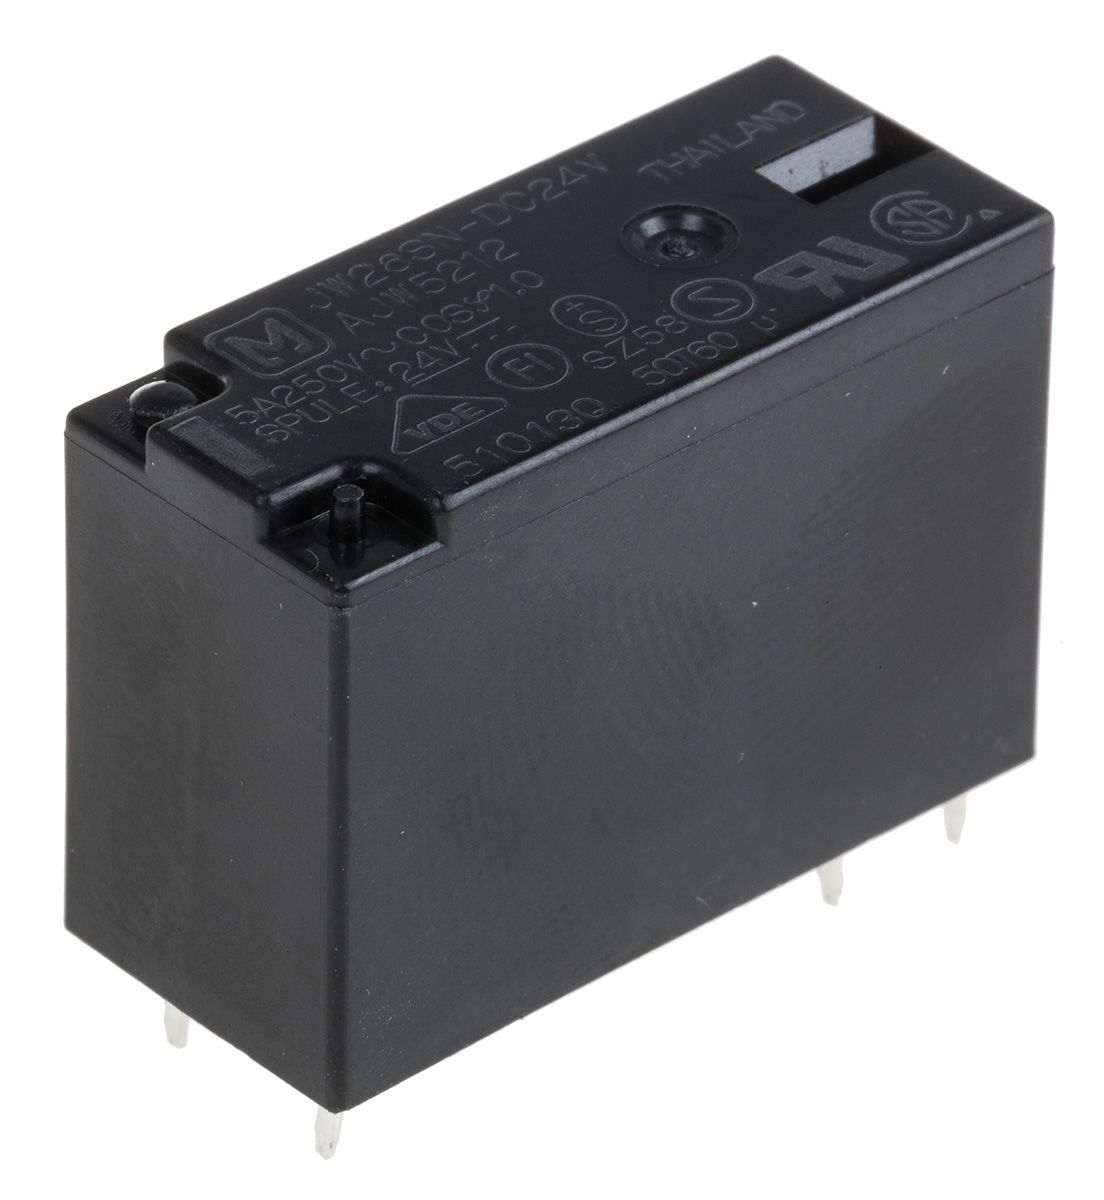 Panasonic PCB Mount Power Relay, 24V dc Coil, 5A Switching Current, DPNO